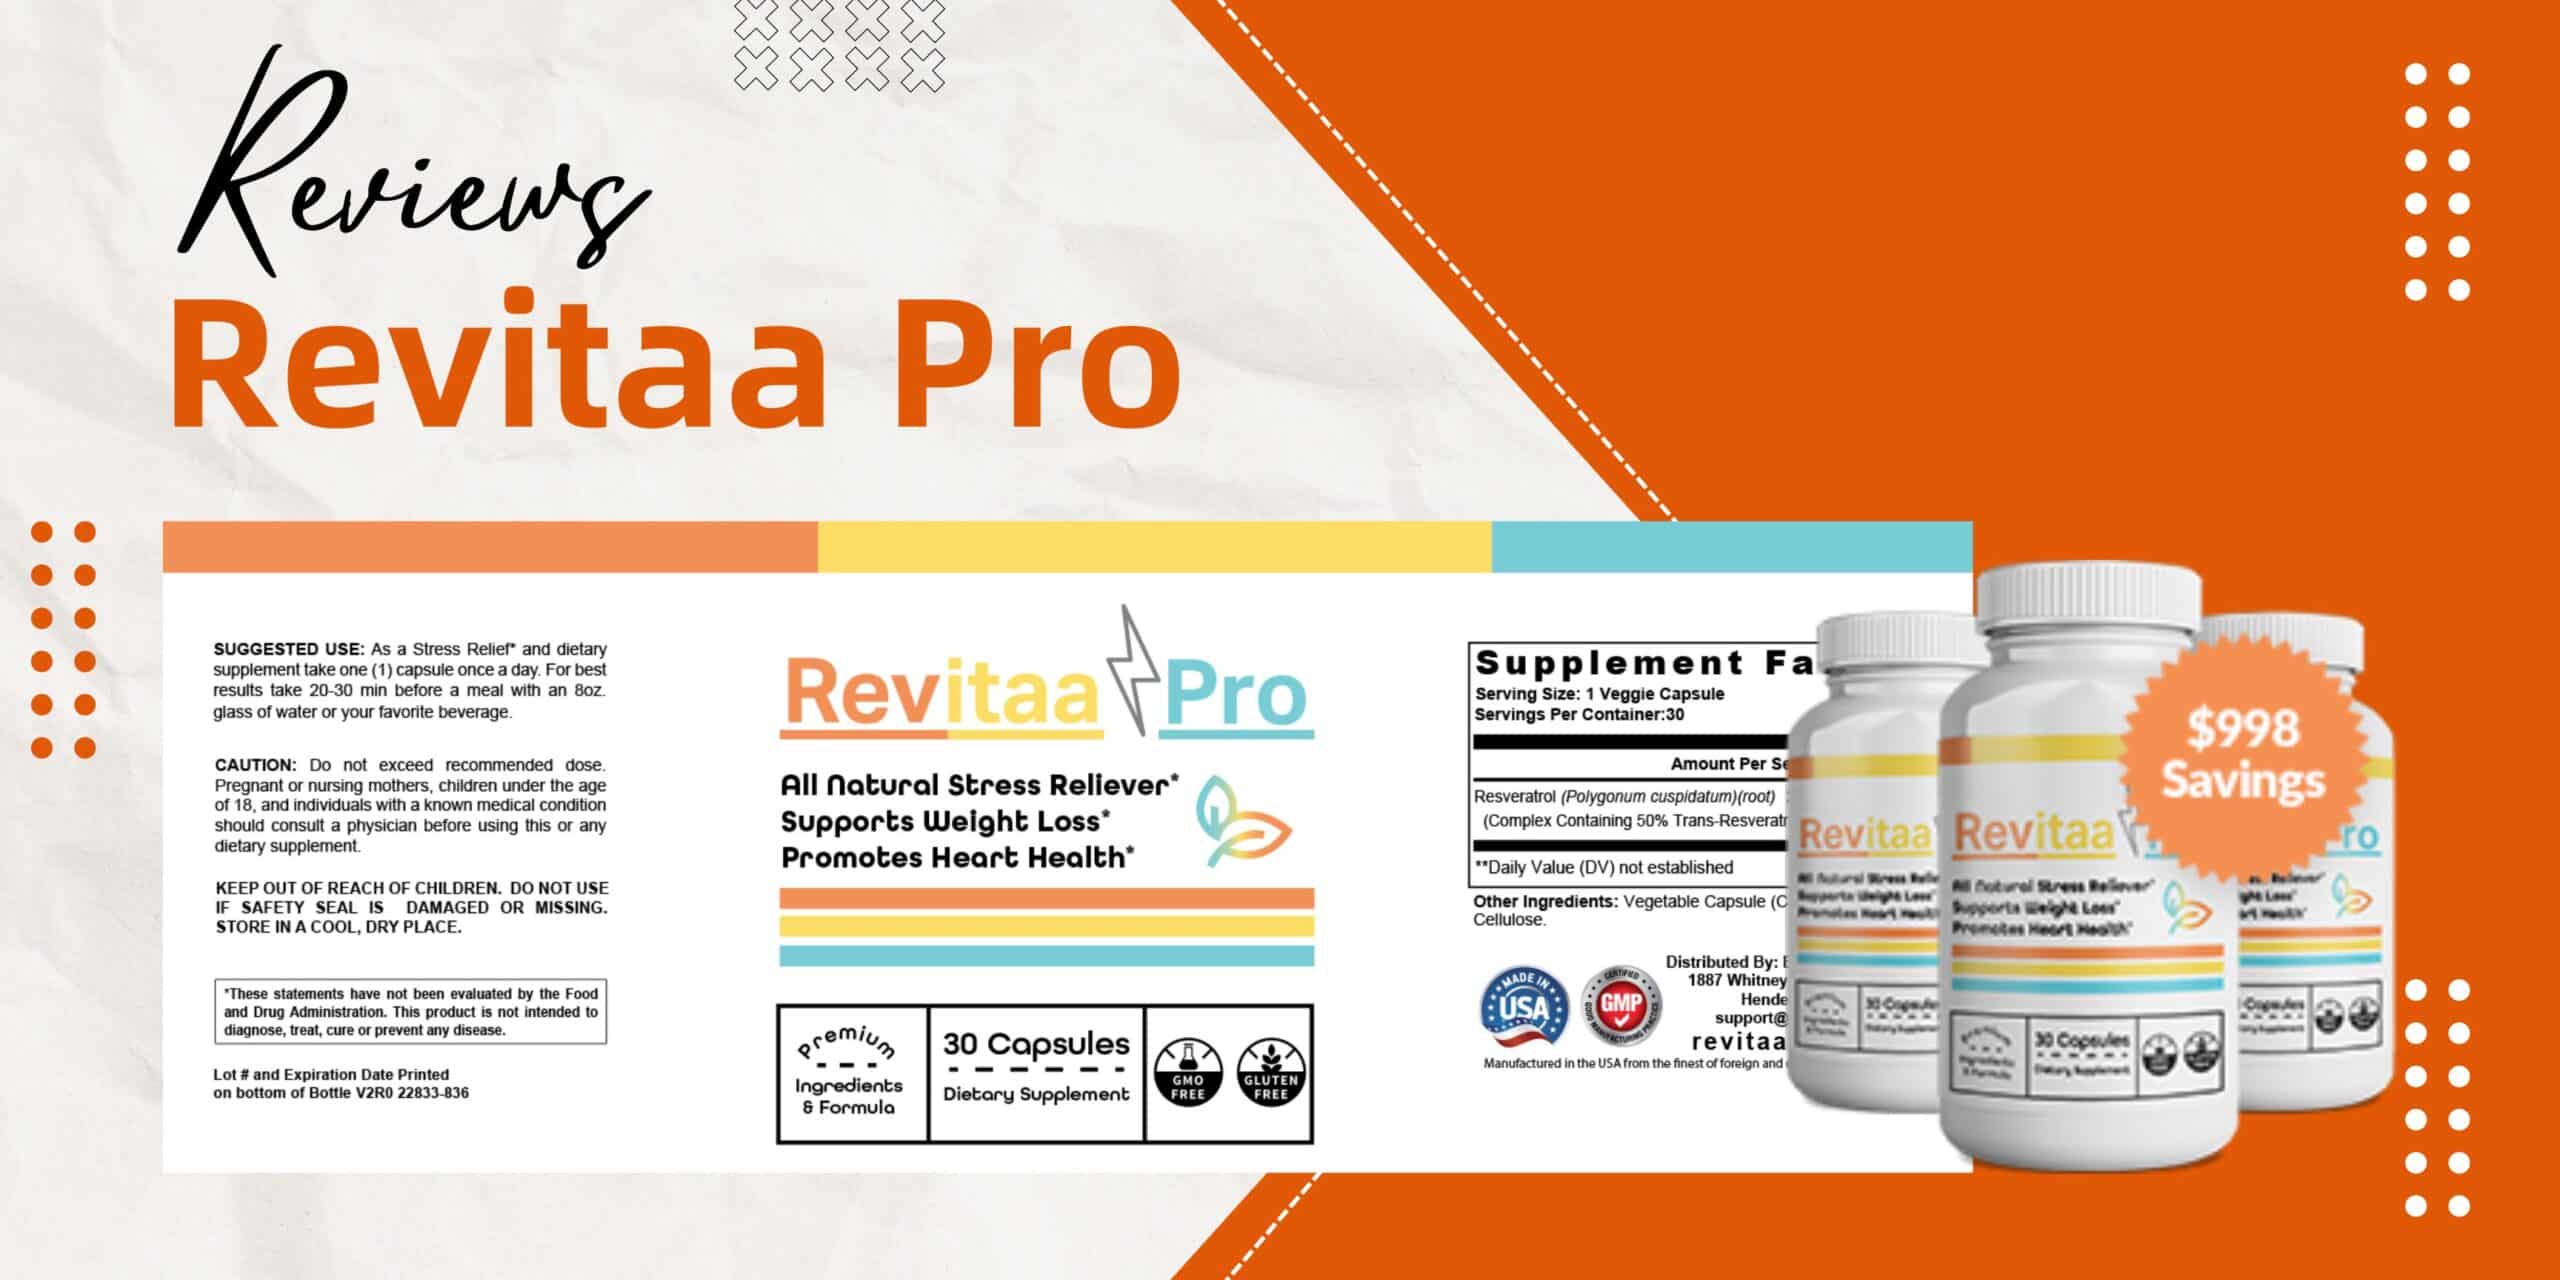 Facts About Revitaa Pro